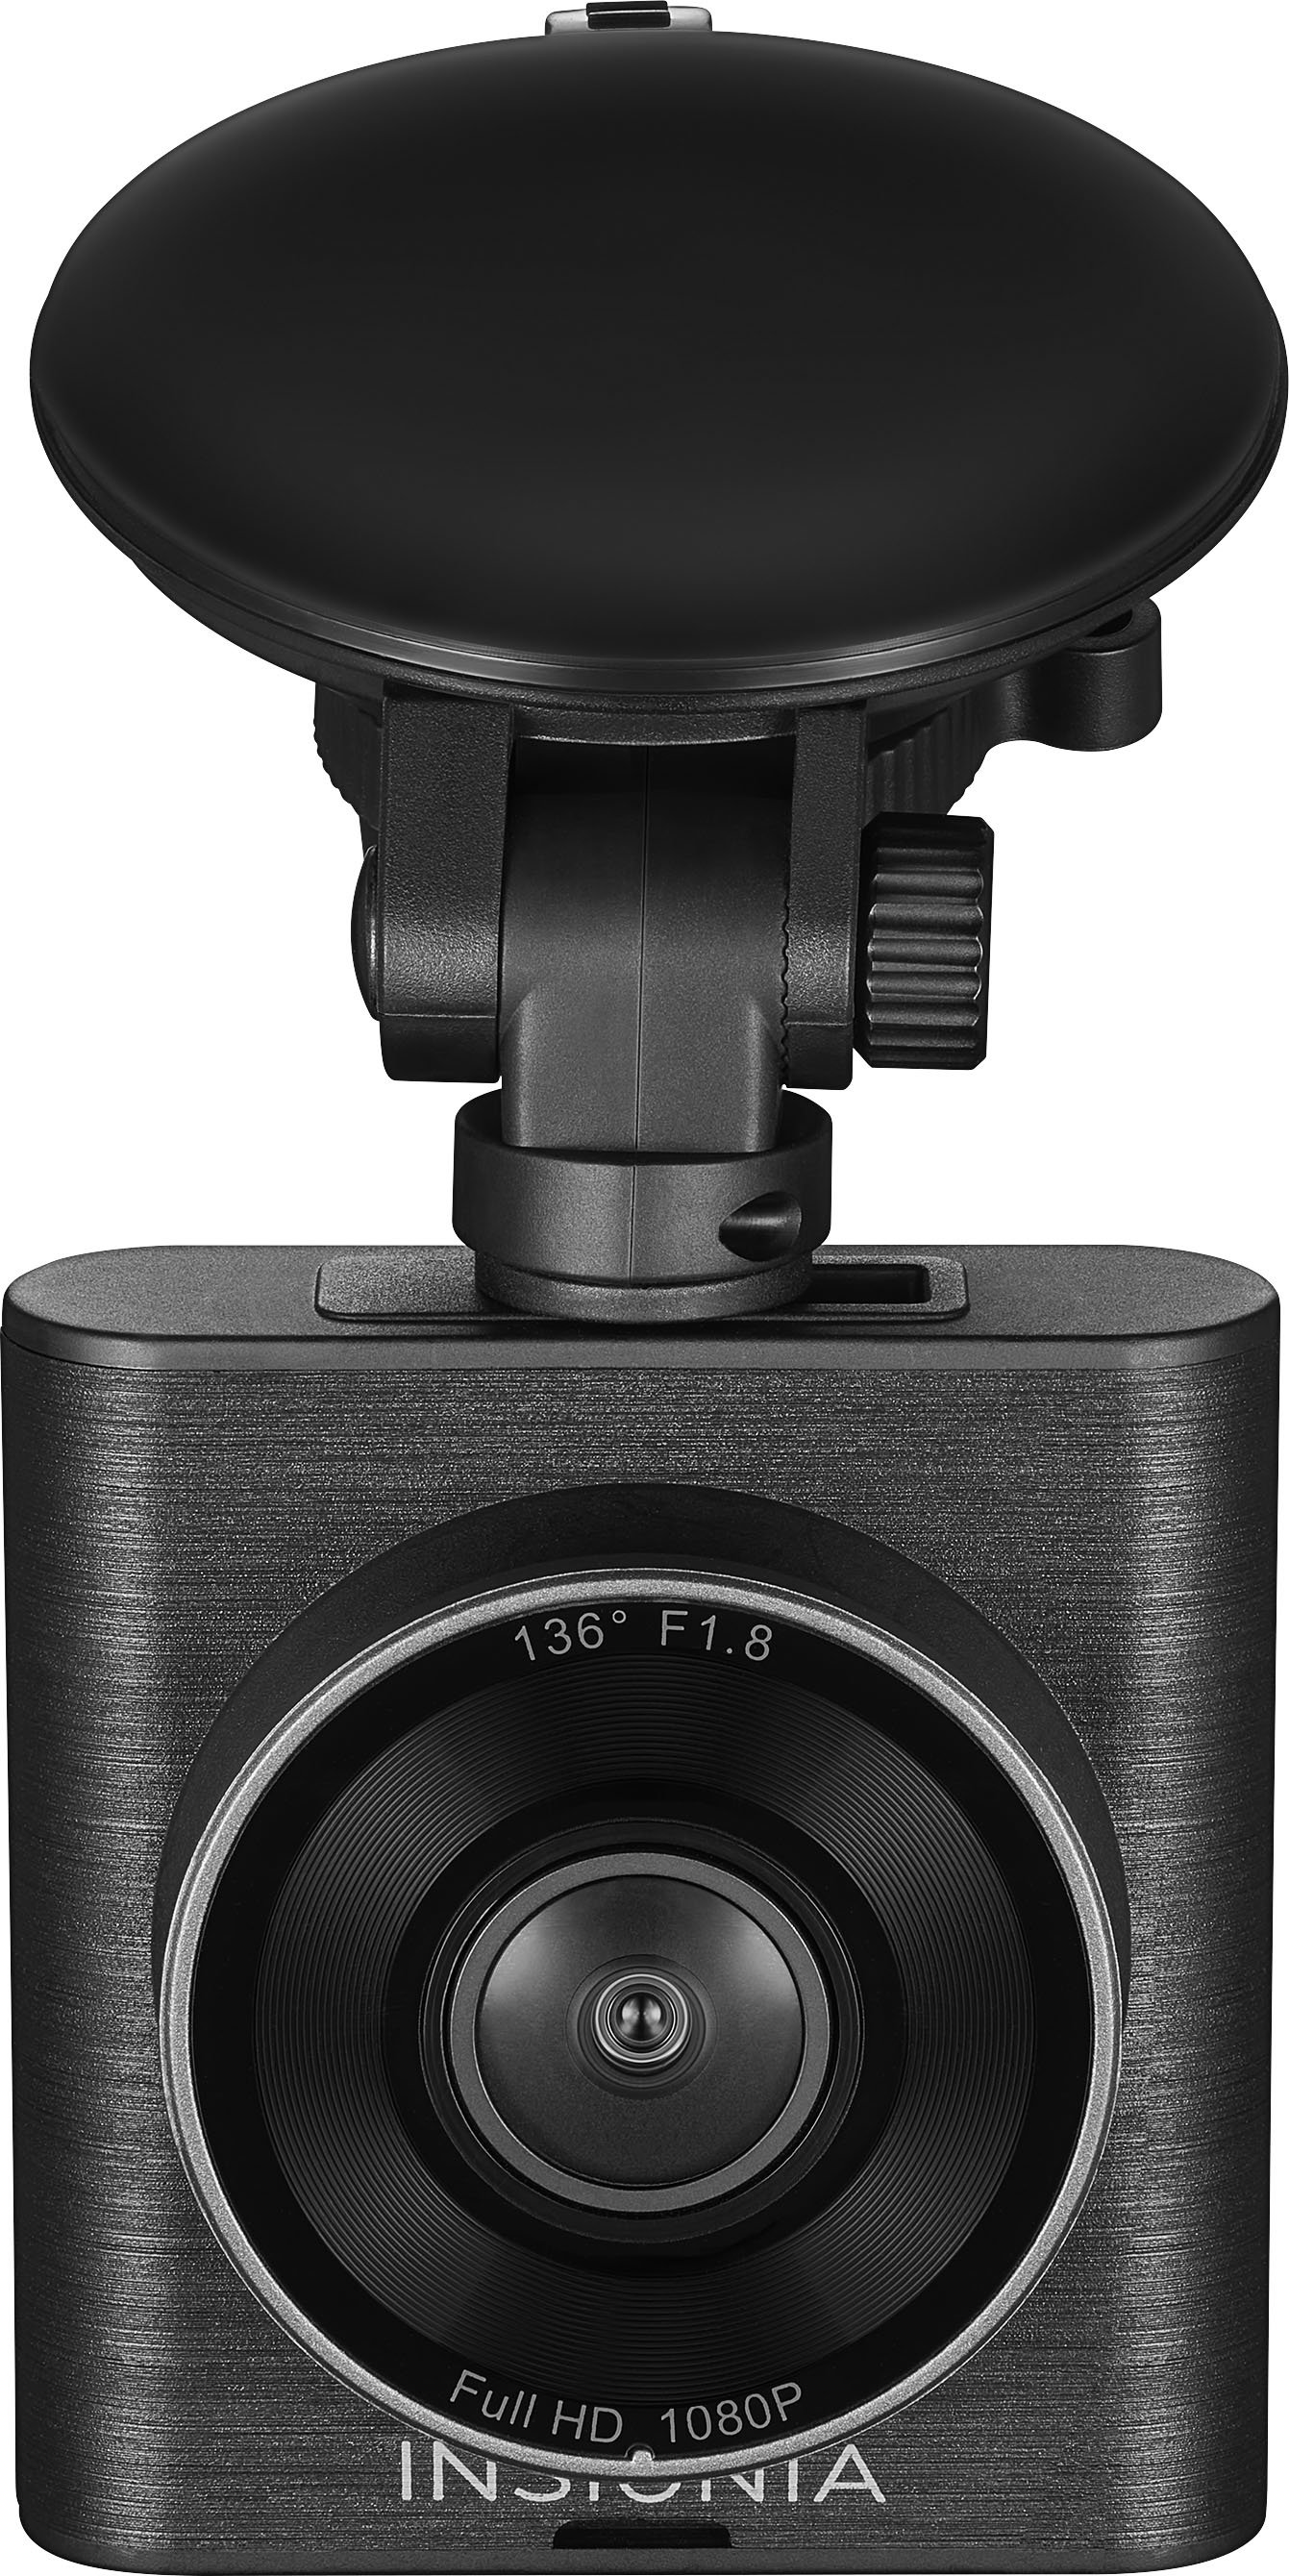 High Definition 1080p Dual Dashboard Camera ADC2-1010-BLK - The